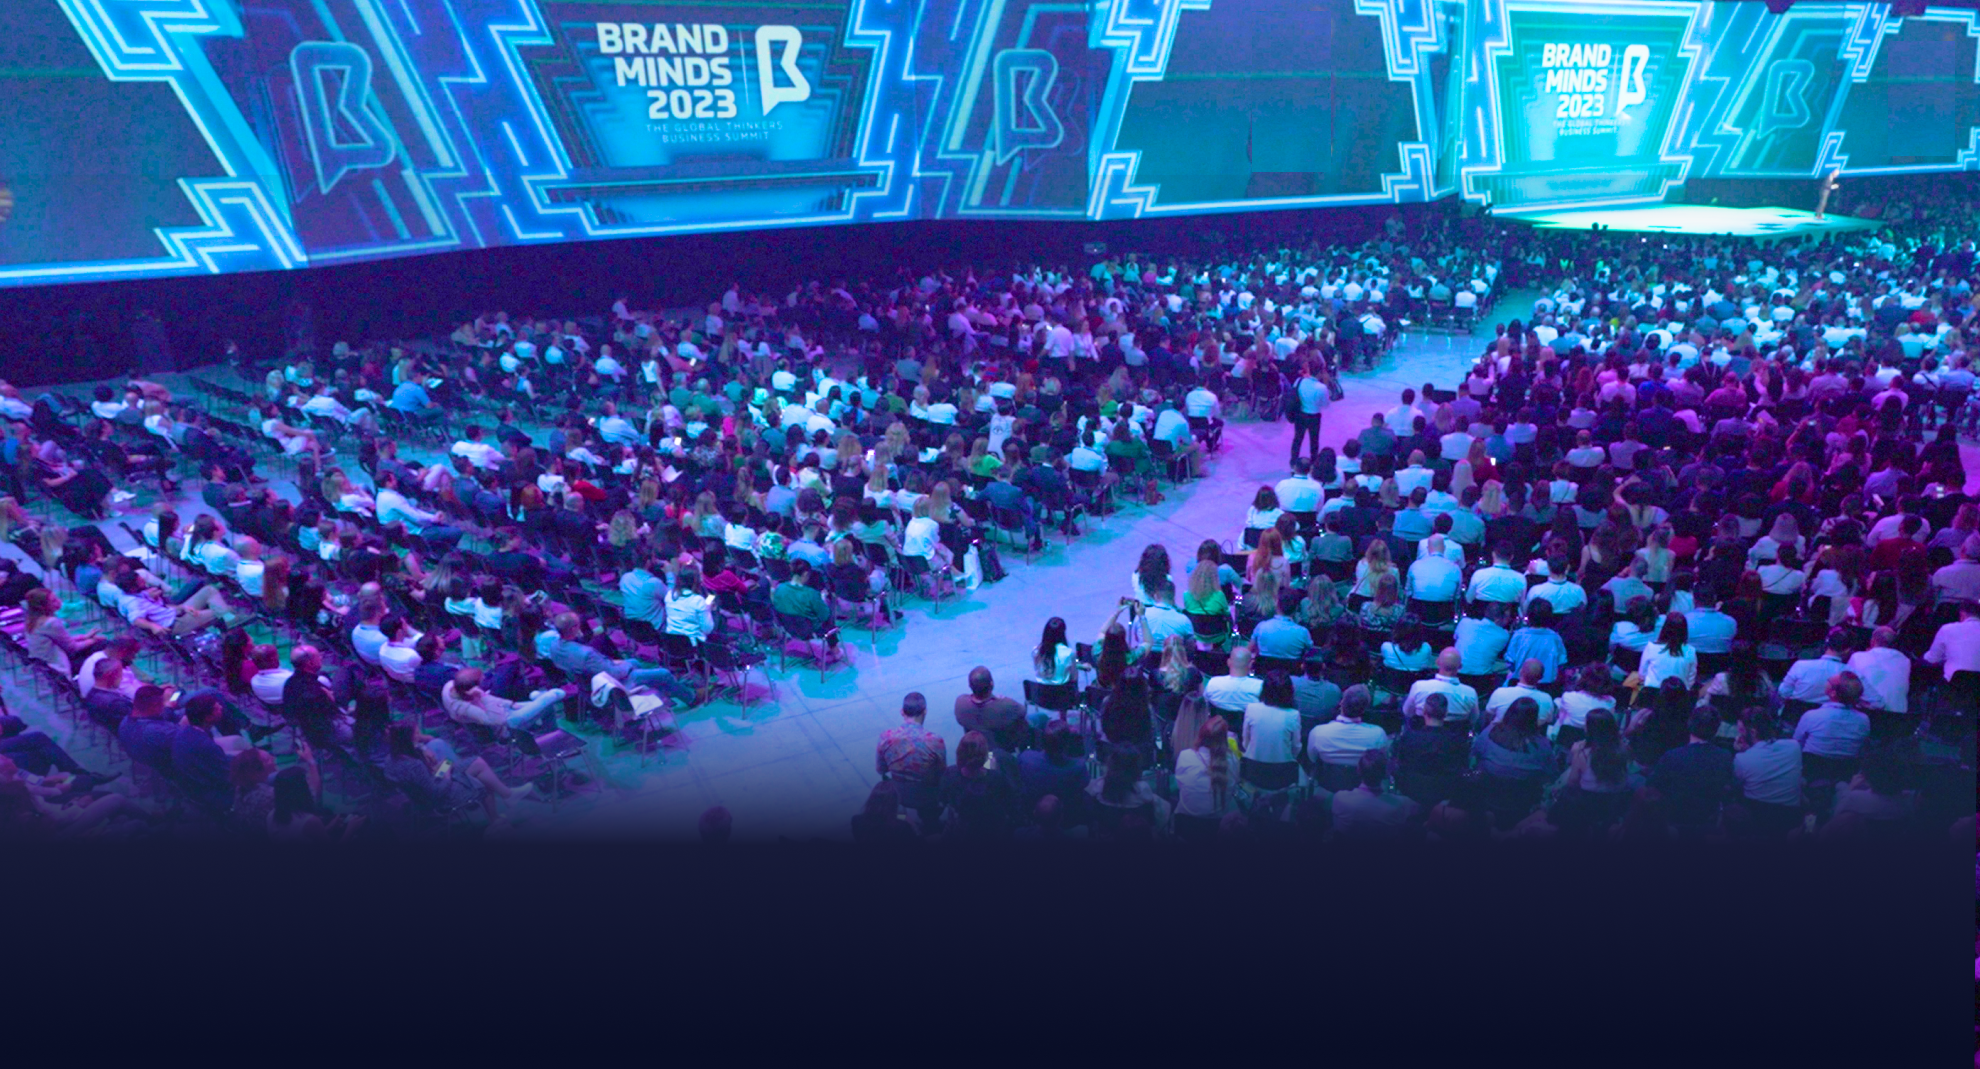 7 days until BRAND MINDS – did you get your ticket?